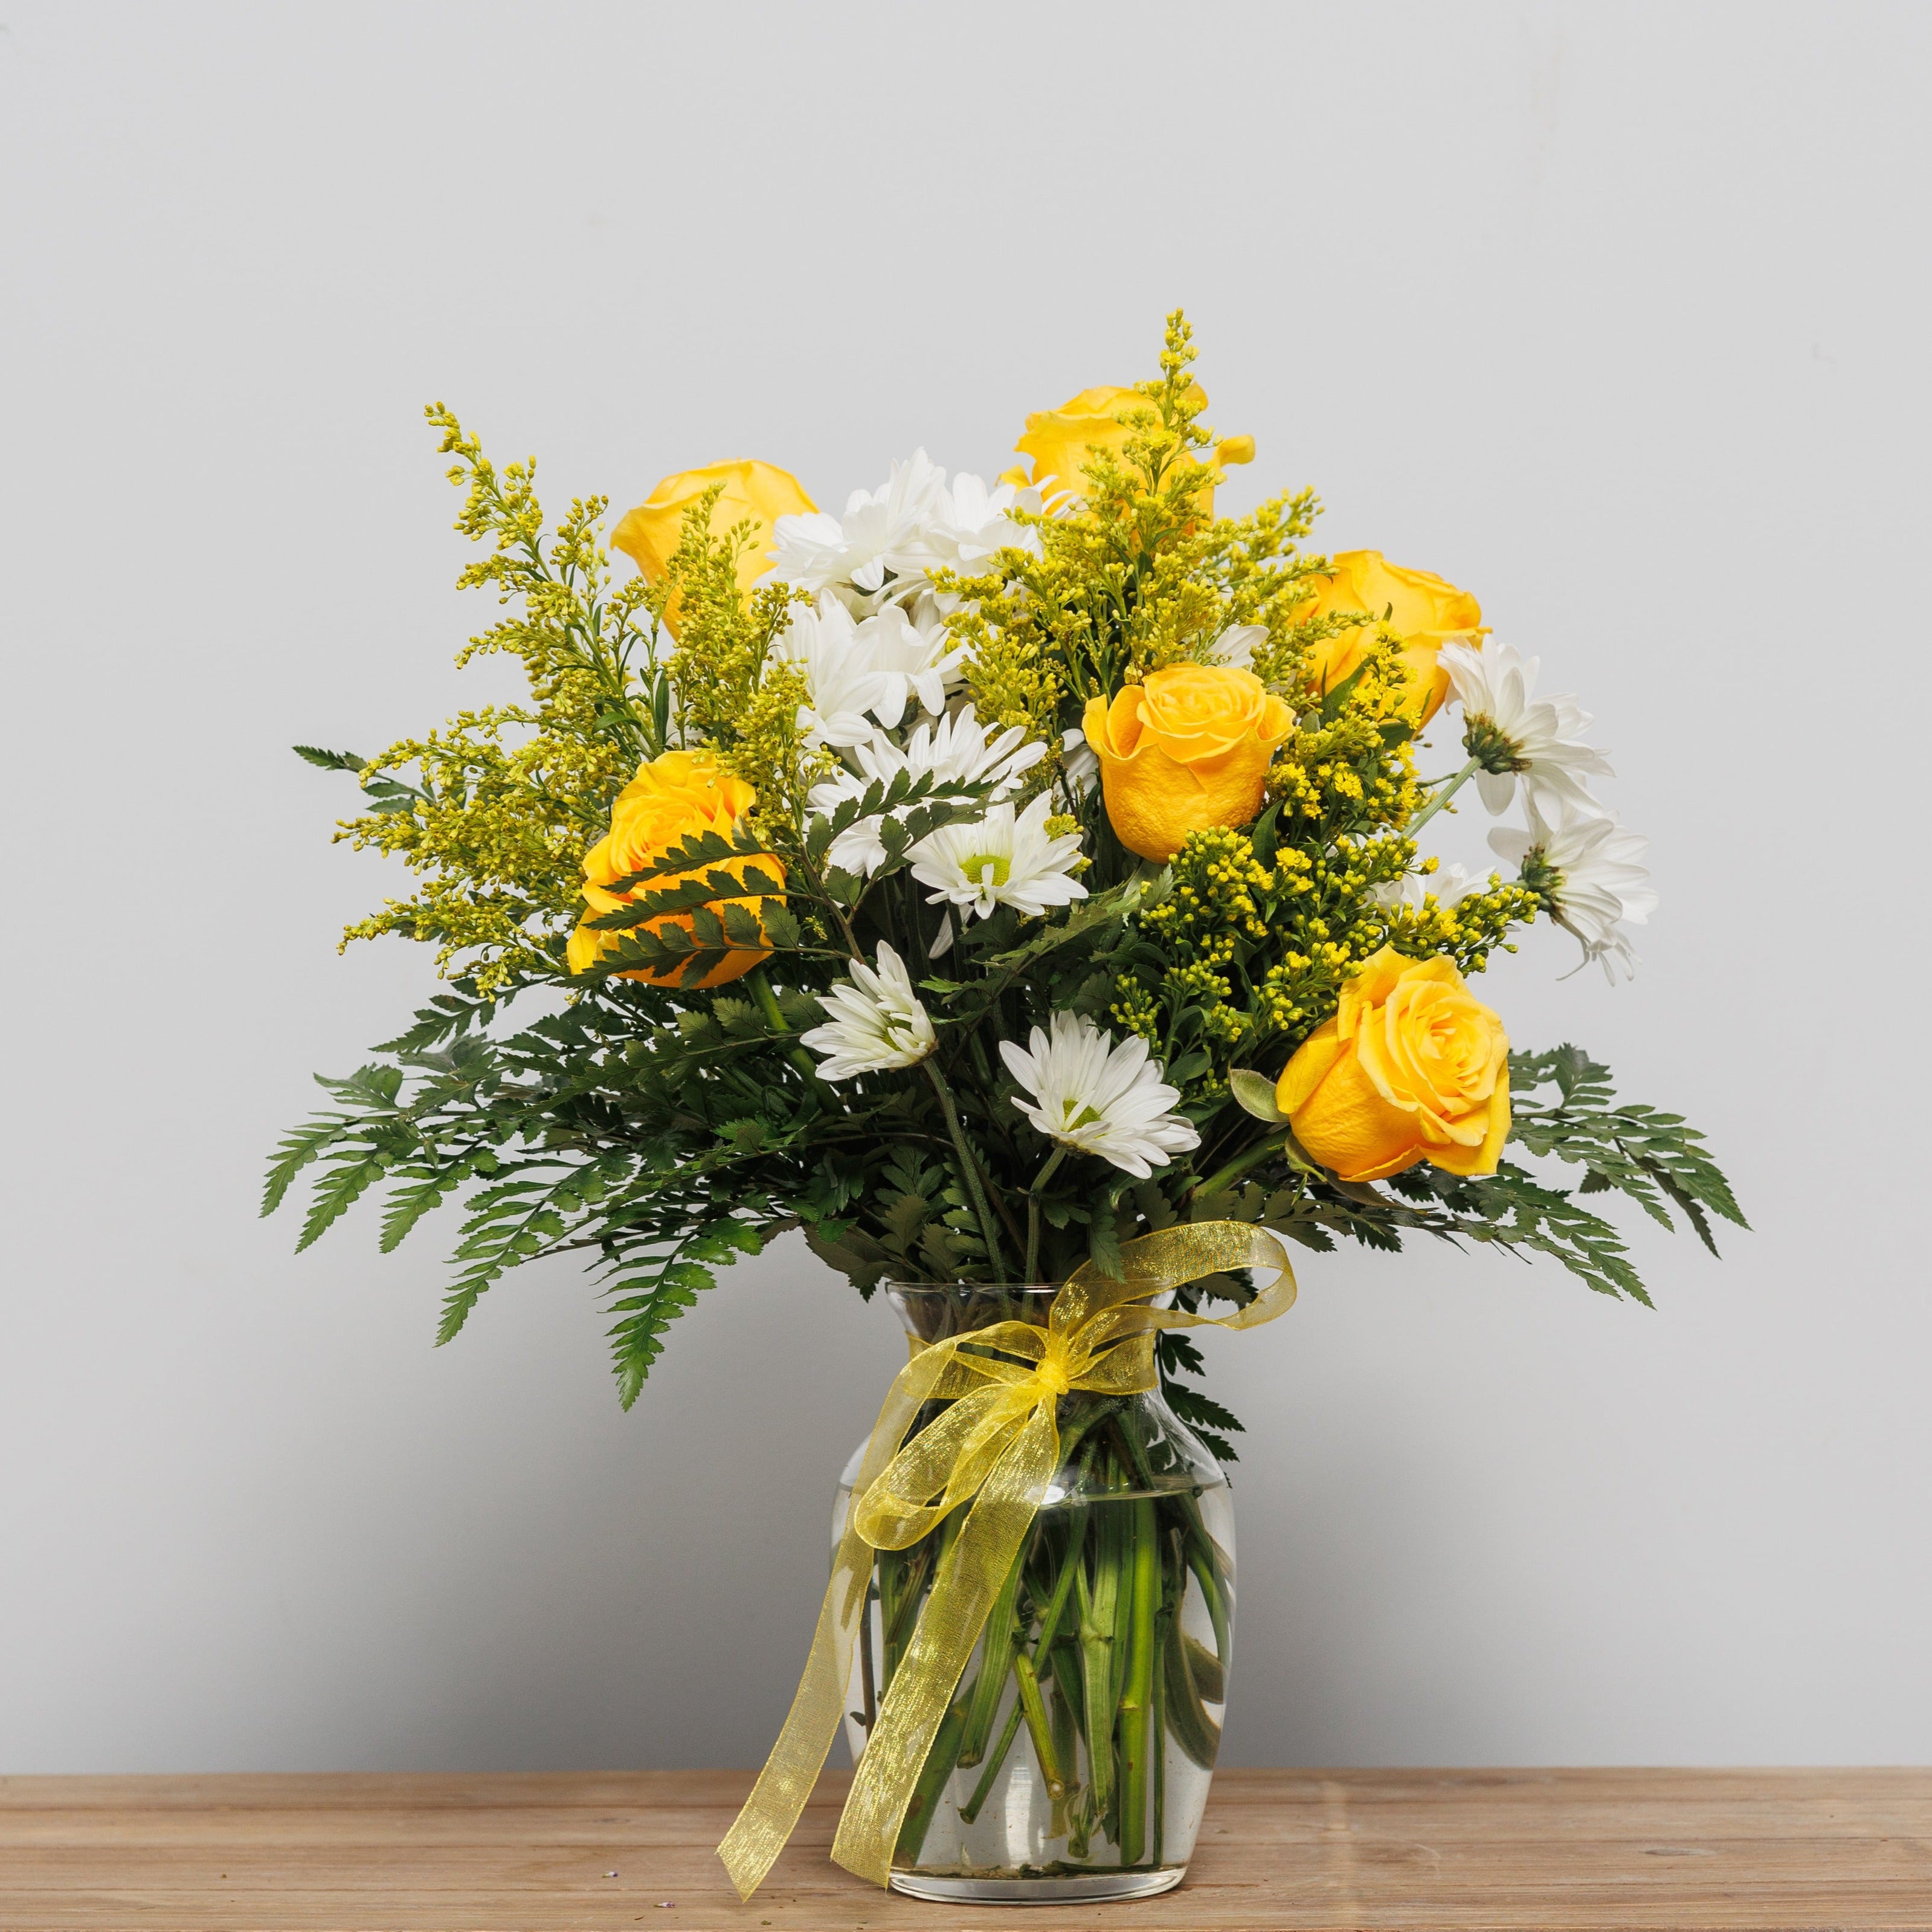 Yellow roses and white daisies arranged in a vase.